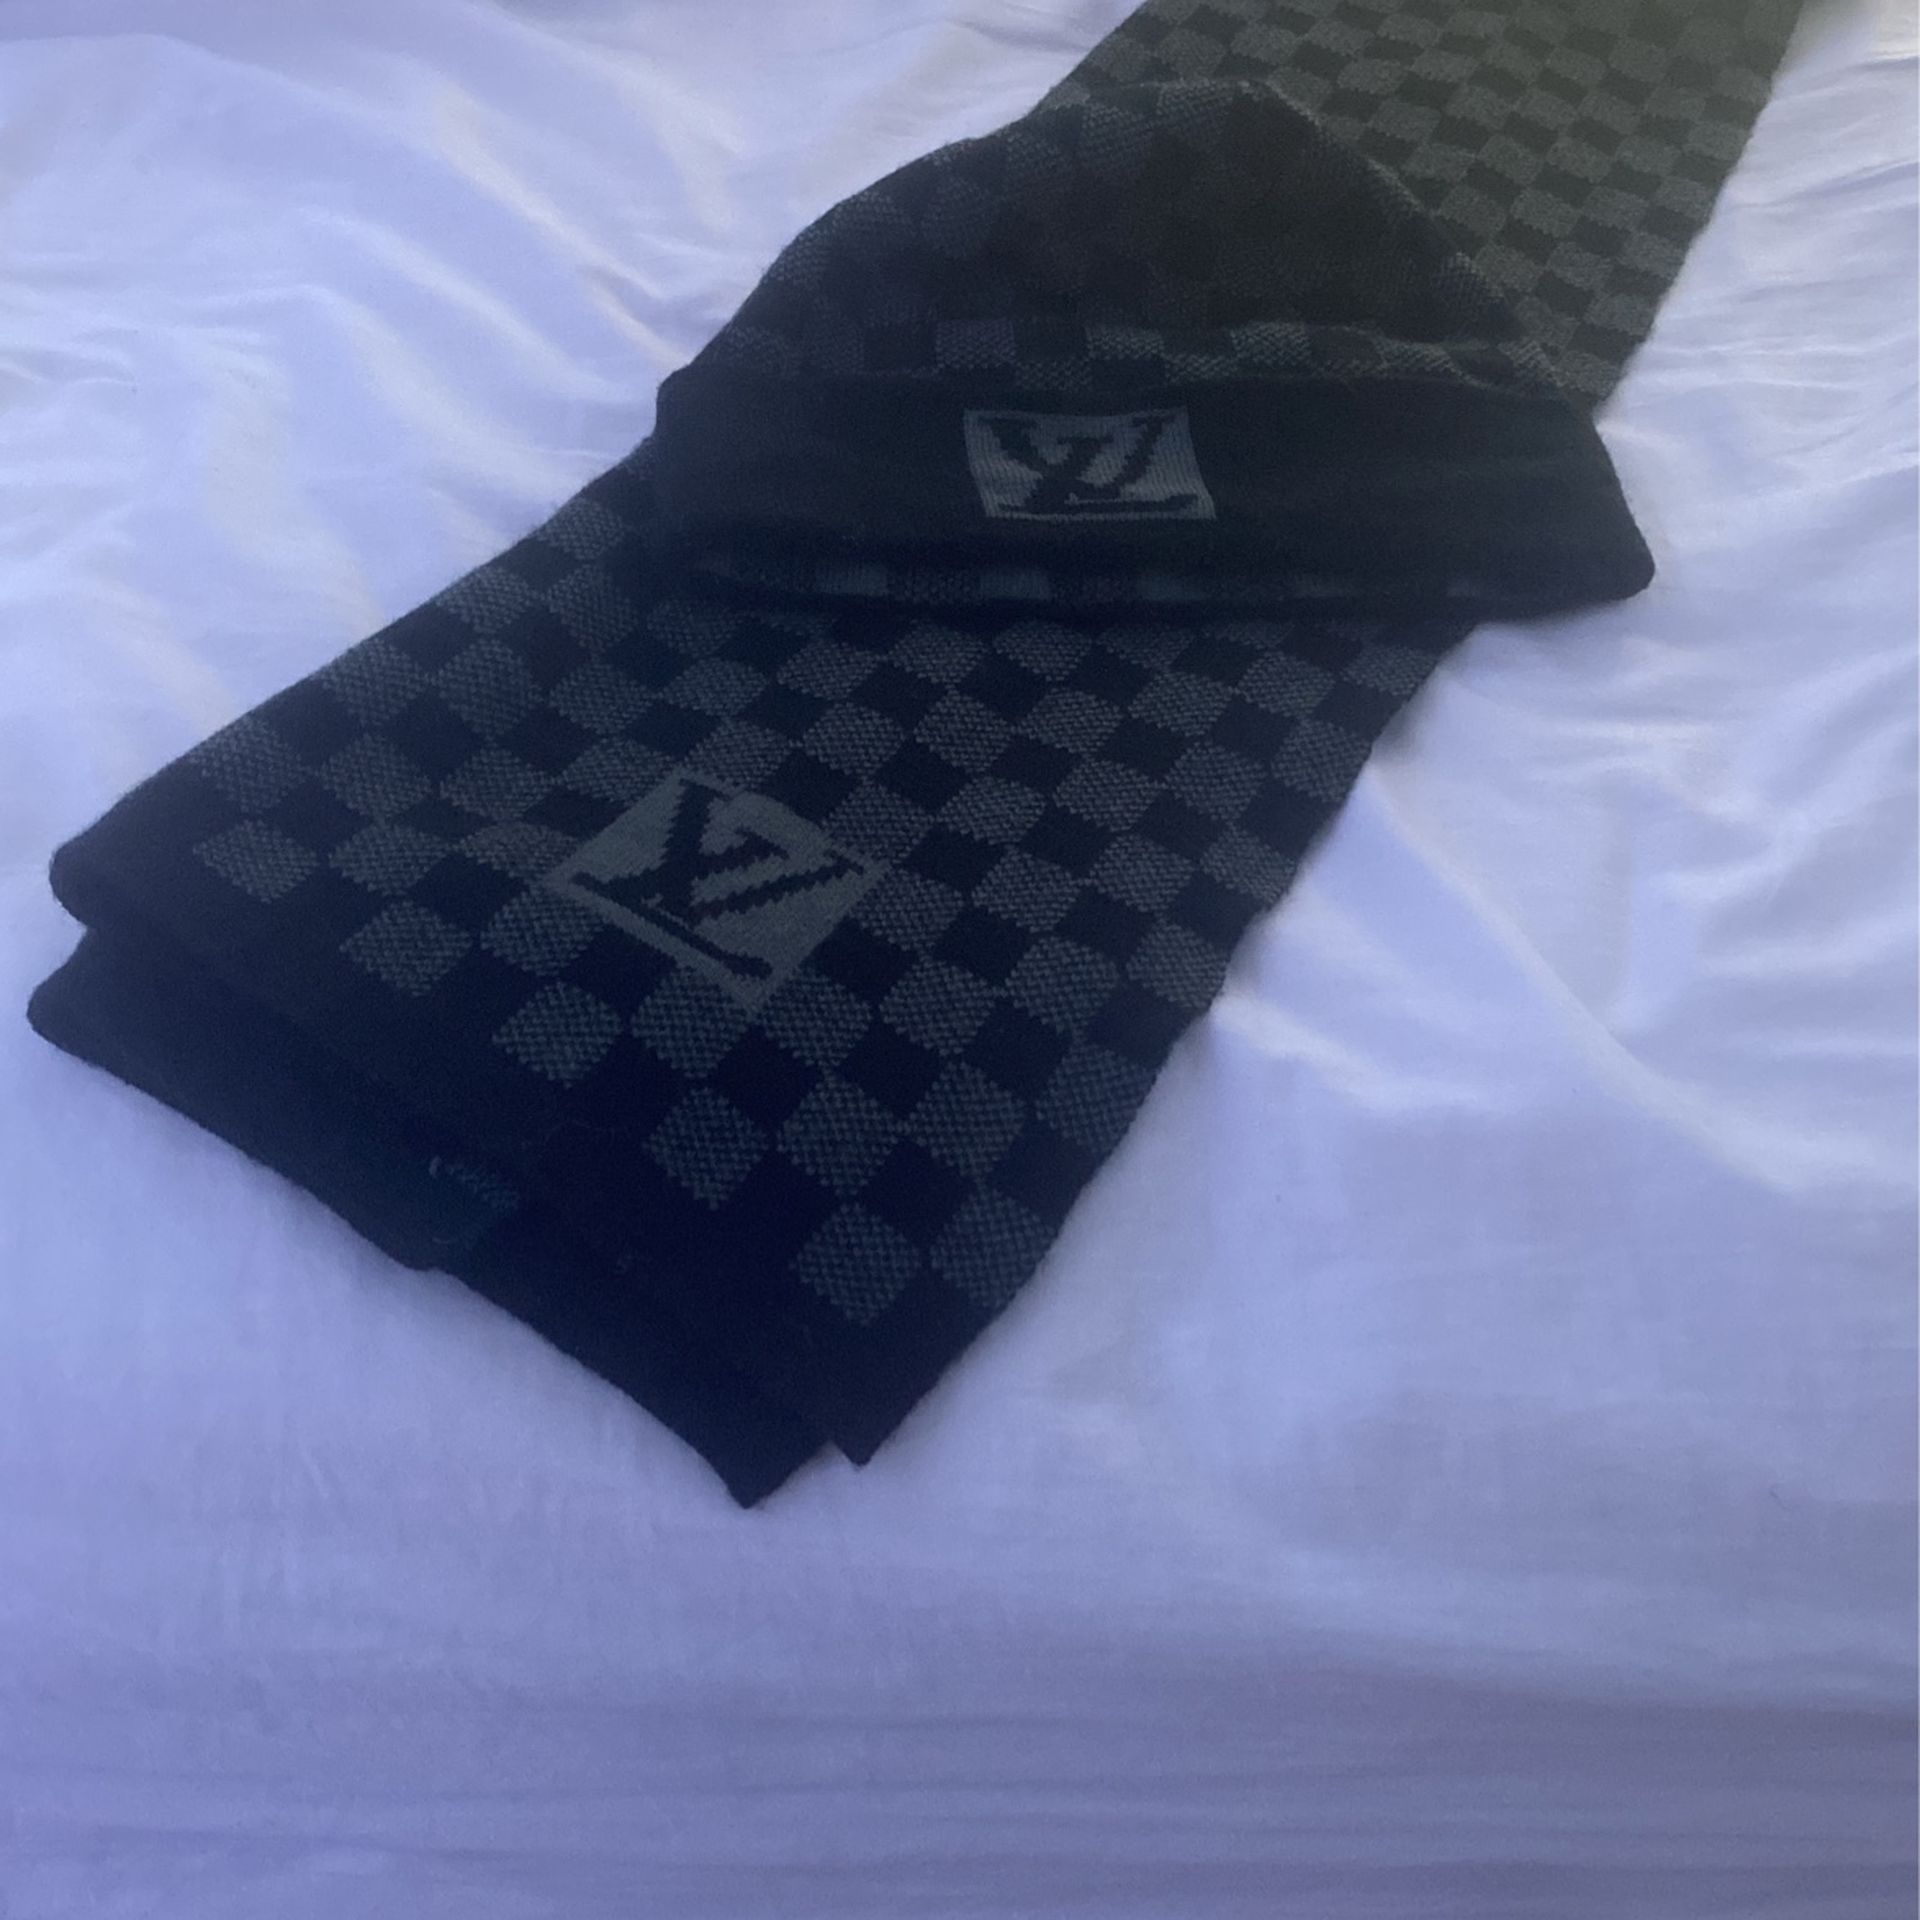 Louis Vuitton Hat + Scarf for Sale in Lawrenceville, GA - OfferUp